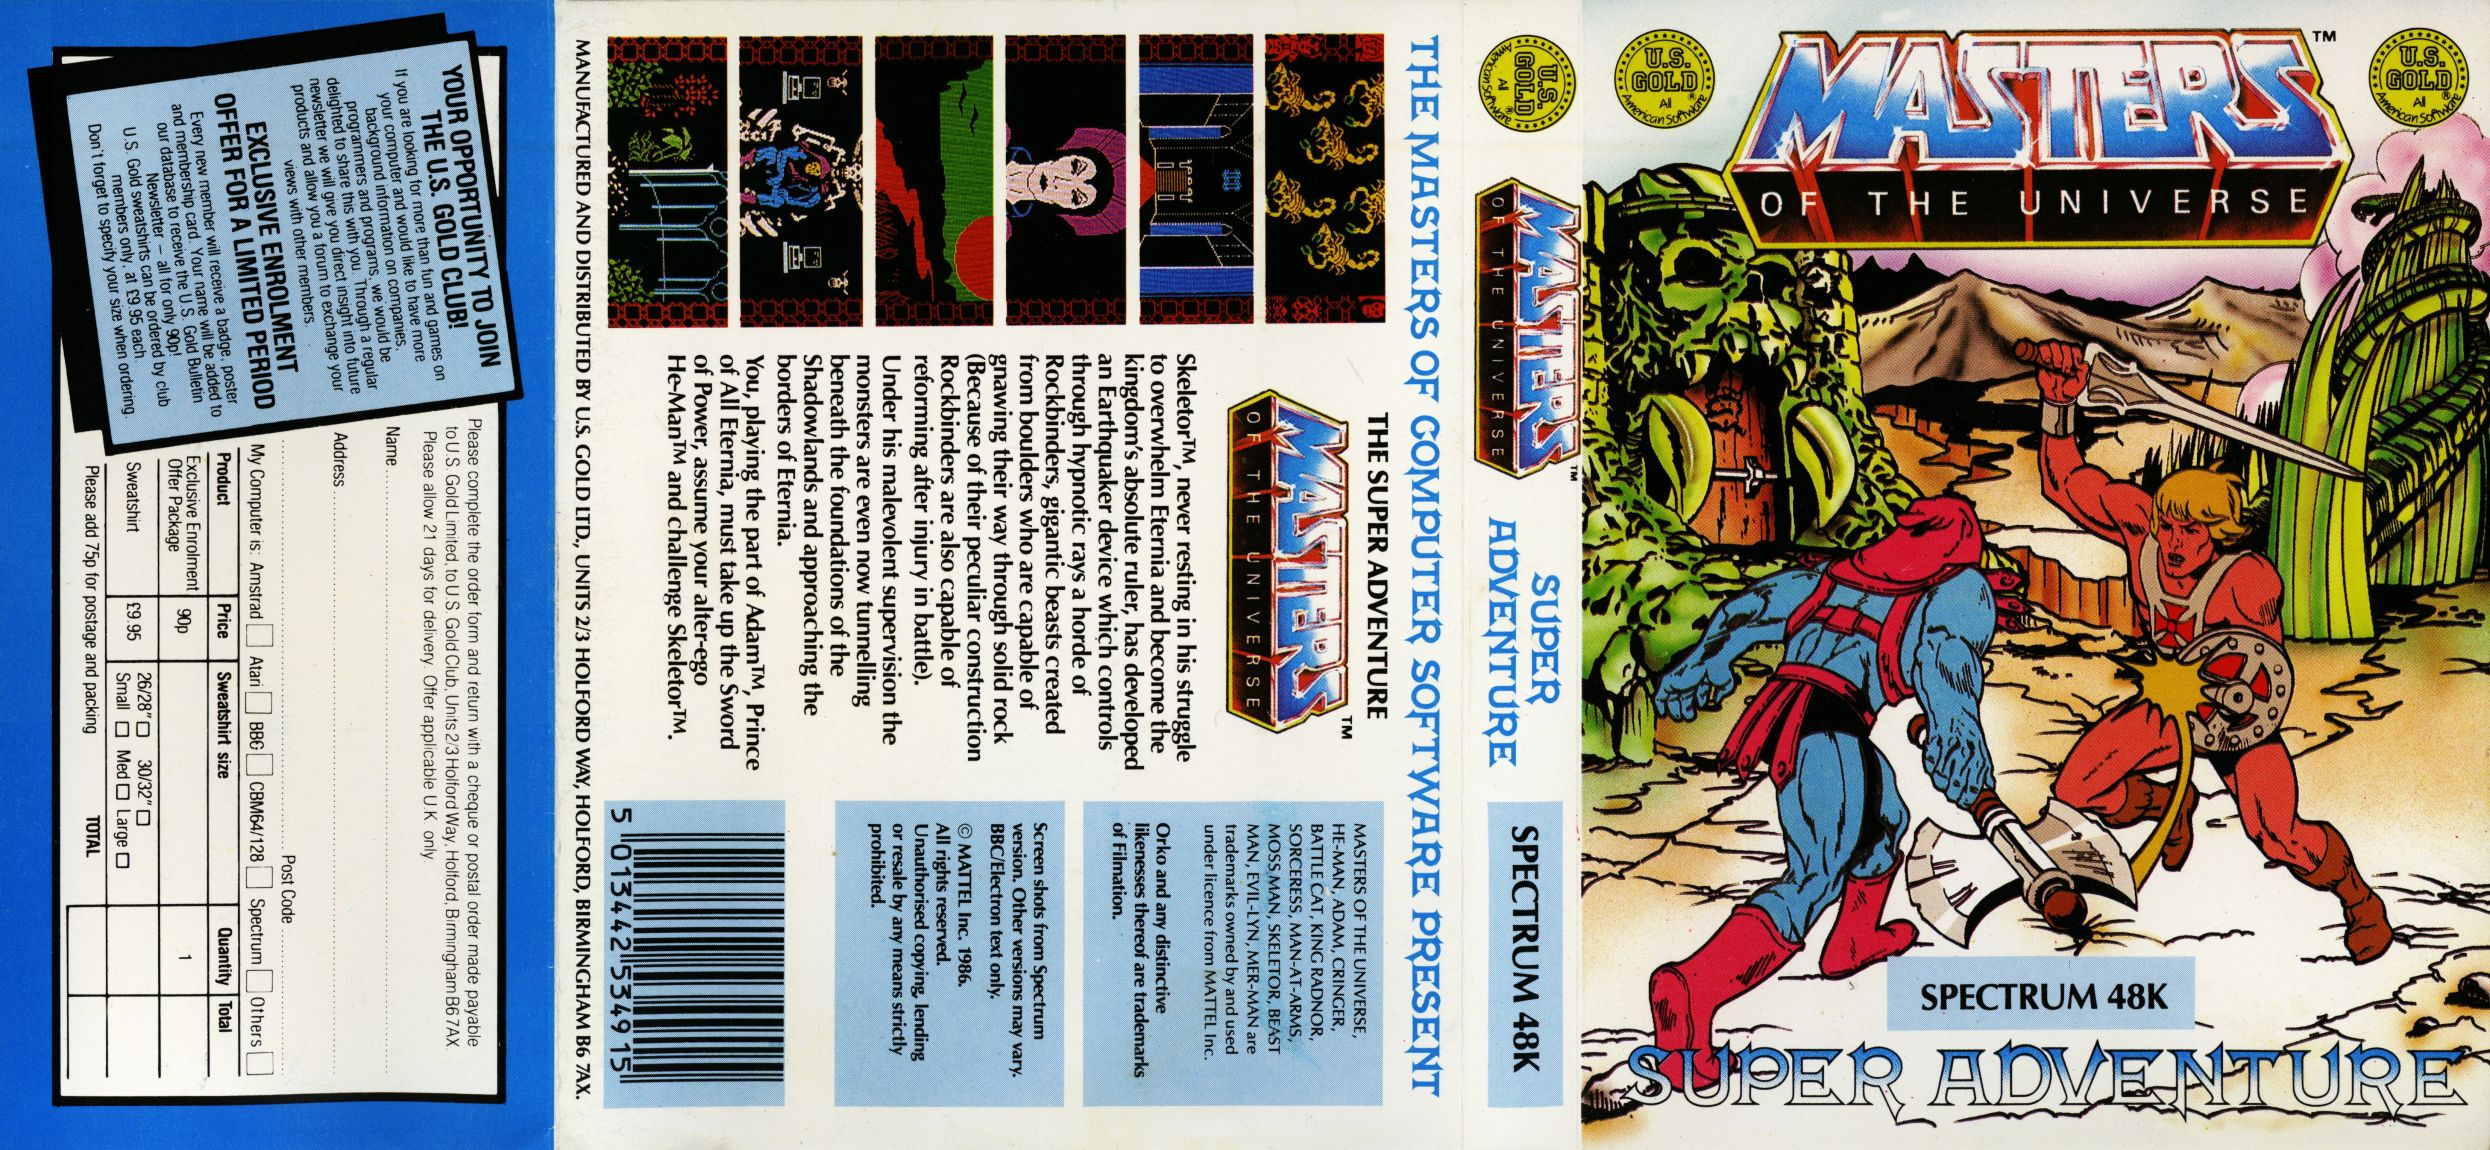 Masters of the Universe - The Super Adventure at Spectrum 